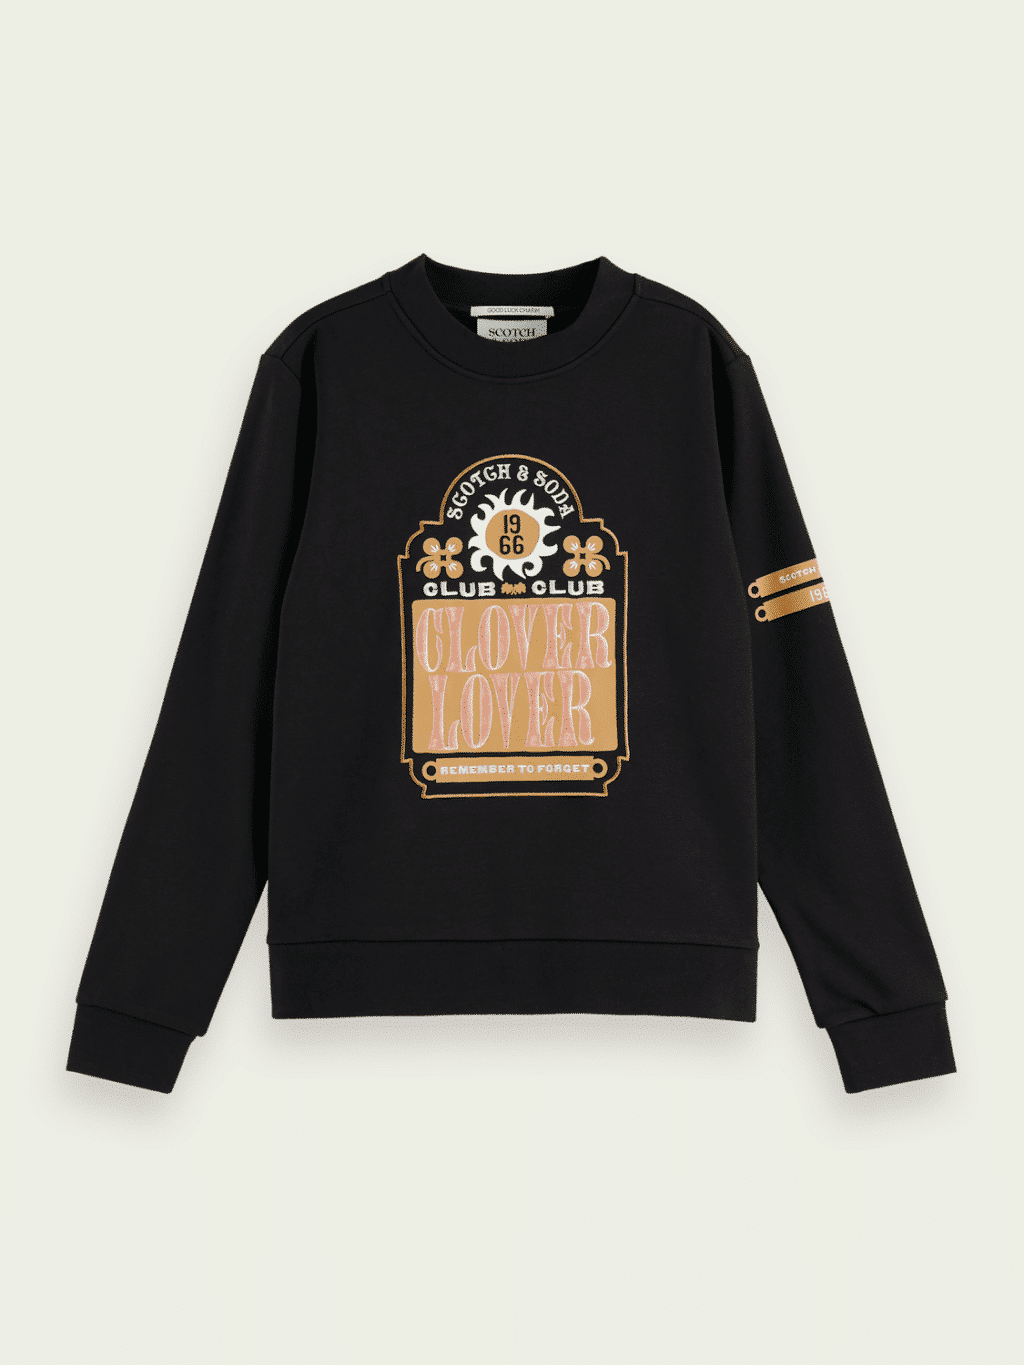 Long Sleeeved SCOTCH & SODA REGULAR FIT EMBROIDERED GRAPHIC SWEATSHIRT